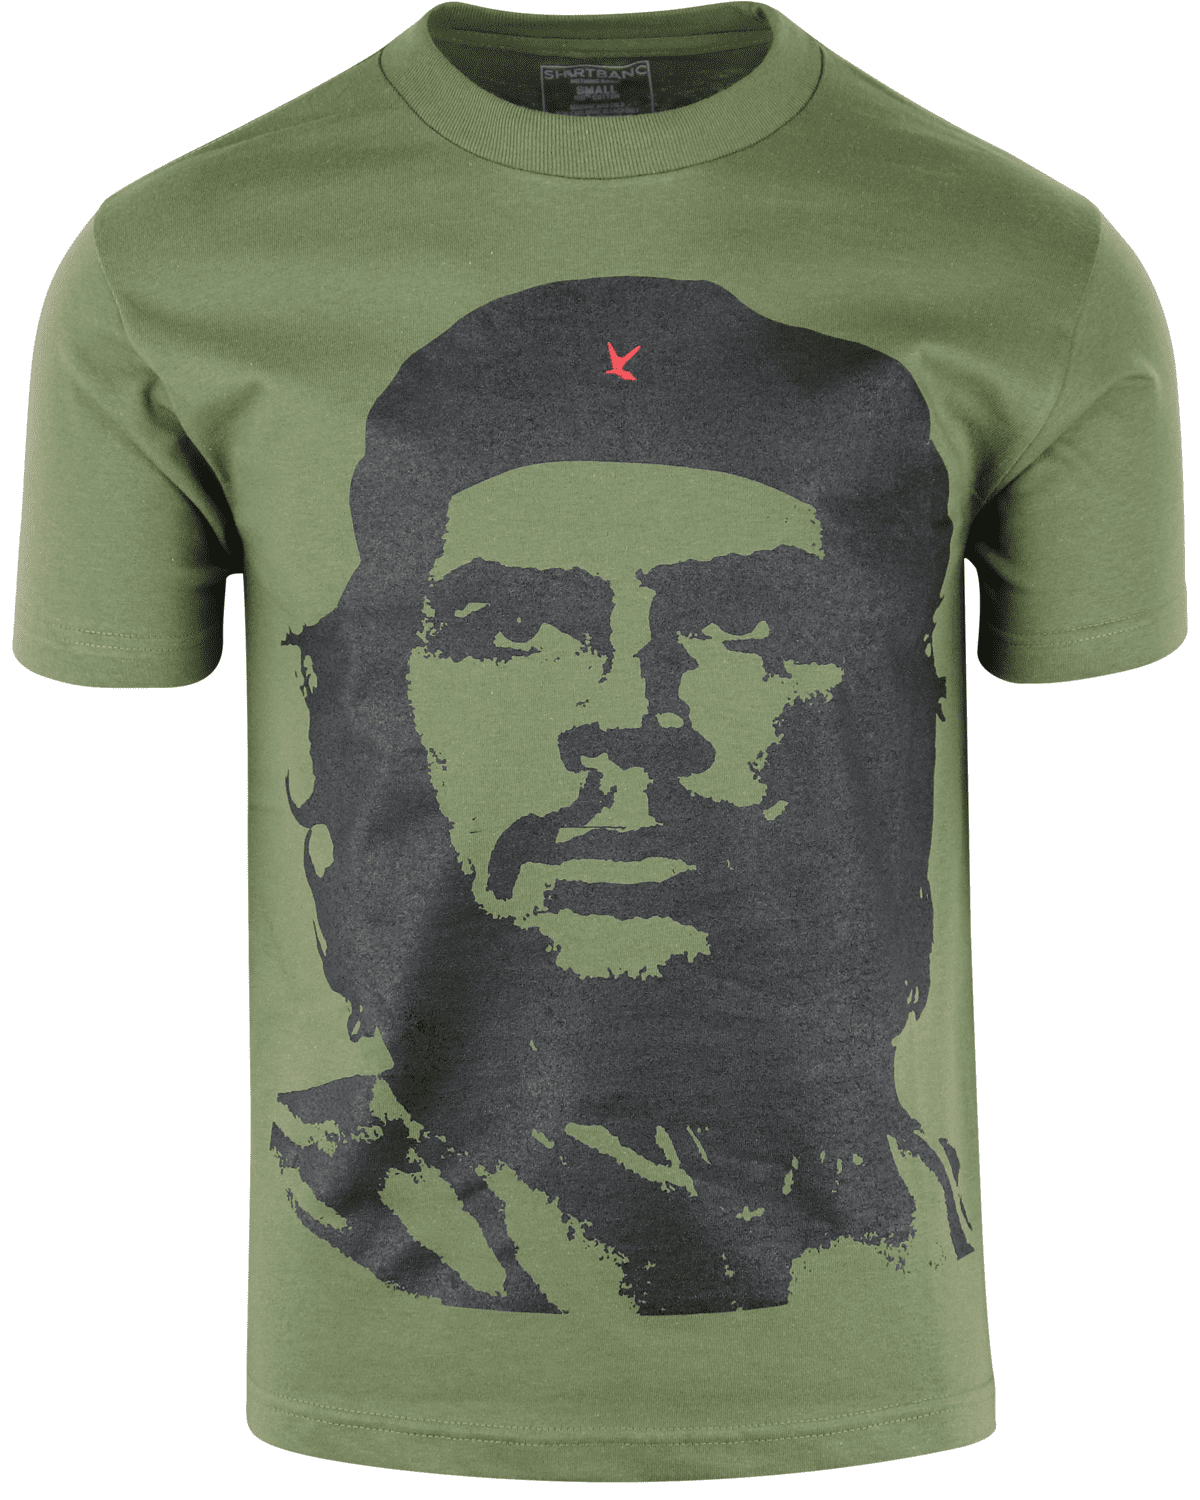  Che Guevara Vintage Men's Funny T-Shirt - (Small) - Black :  Clothing, Shoes & Jewelry